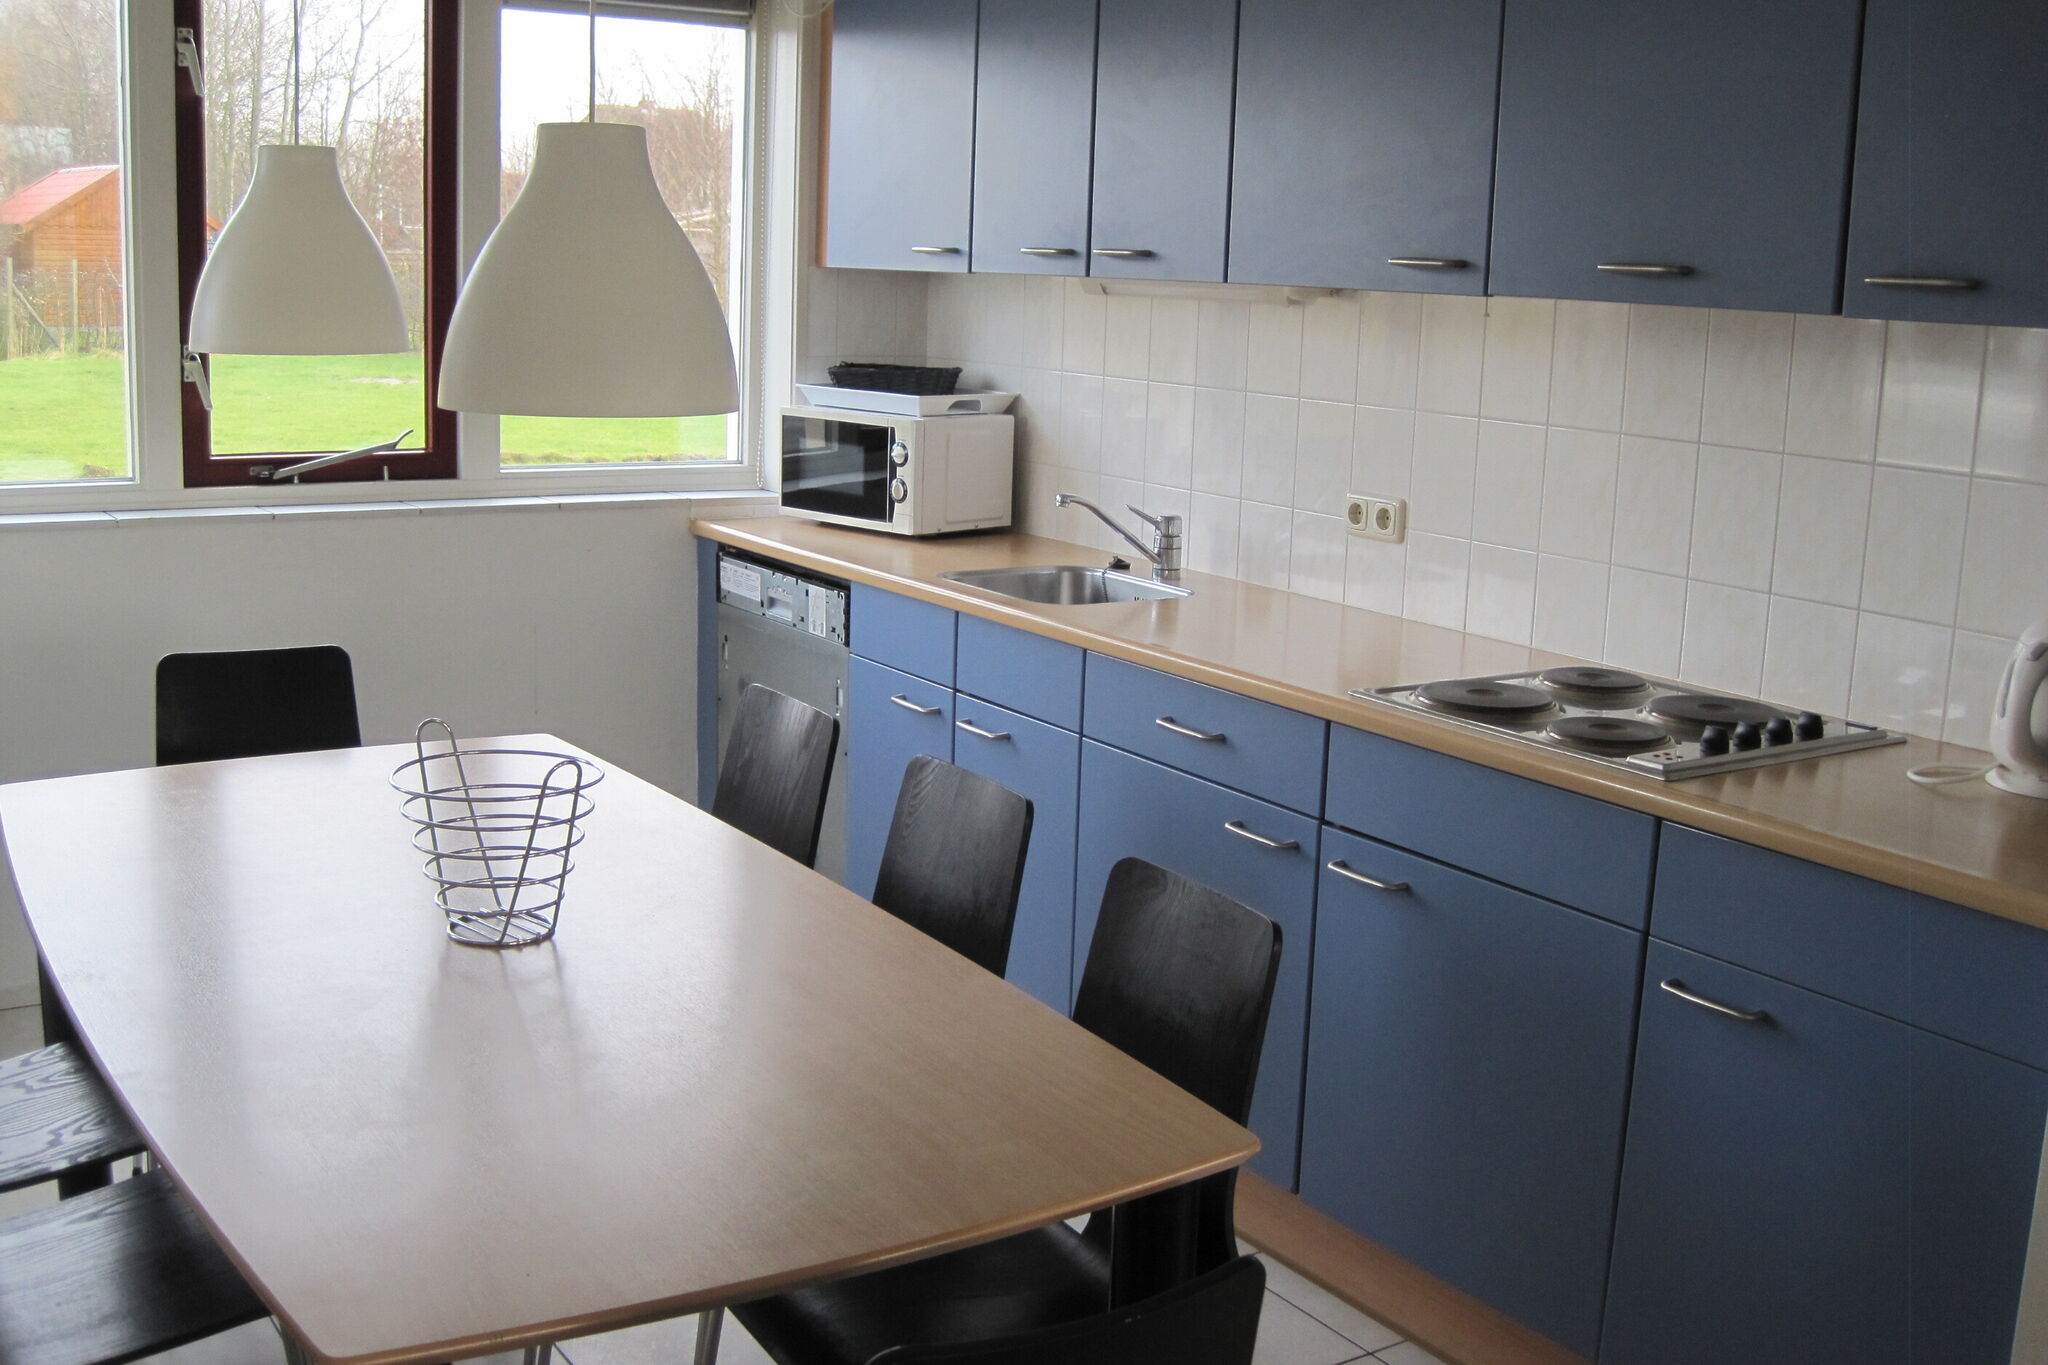 Nice house with a dishwasher, located in Friesland